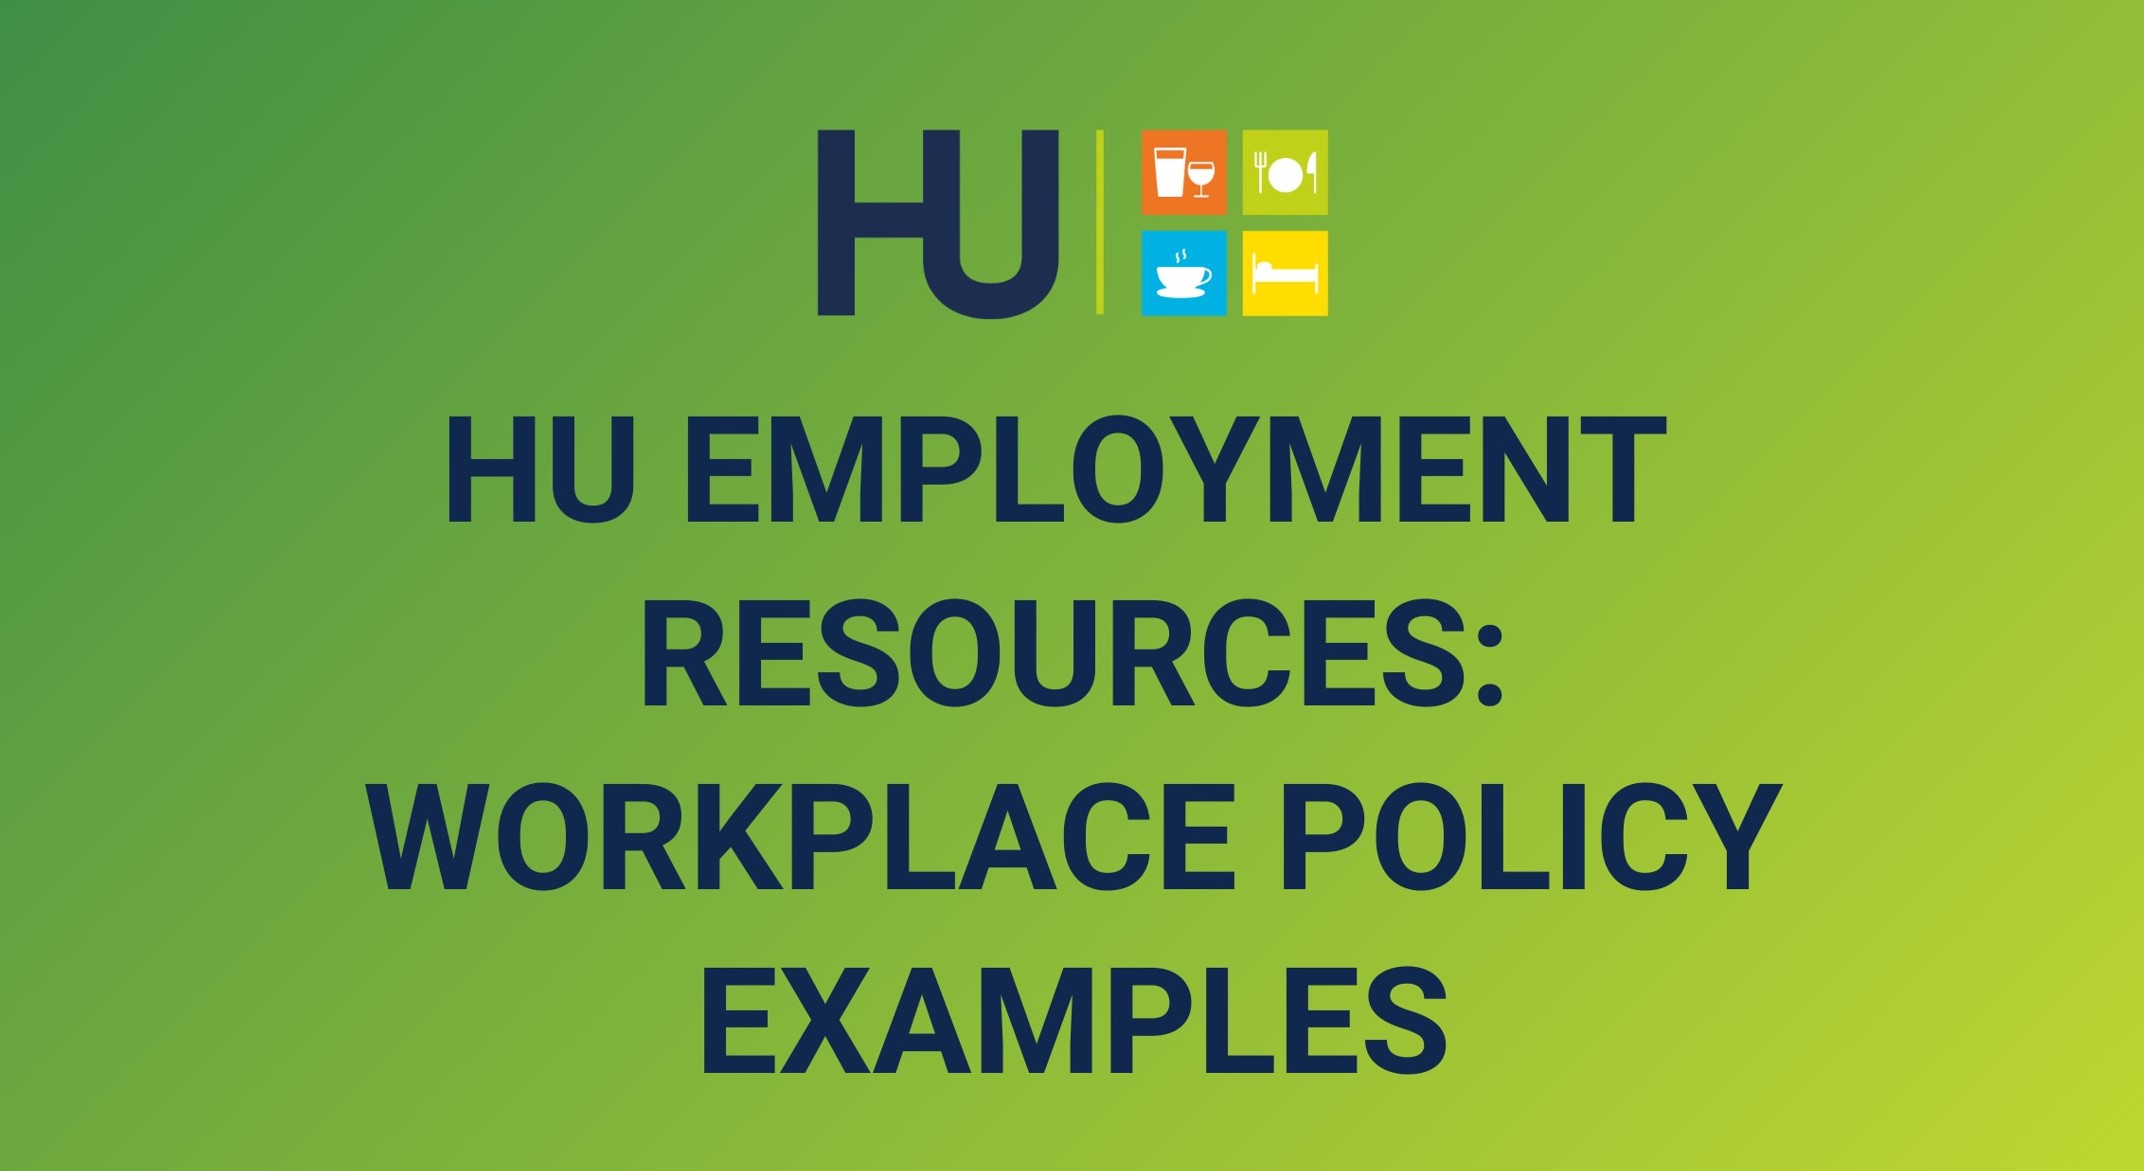 HU EMPLOYMENT RESOURCES - WORKPLACE POLICY EXAMPLES